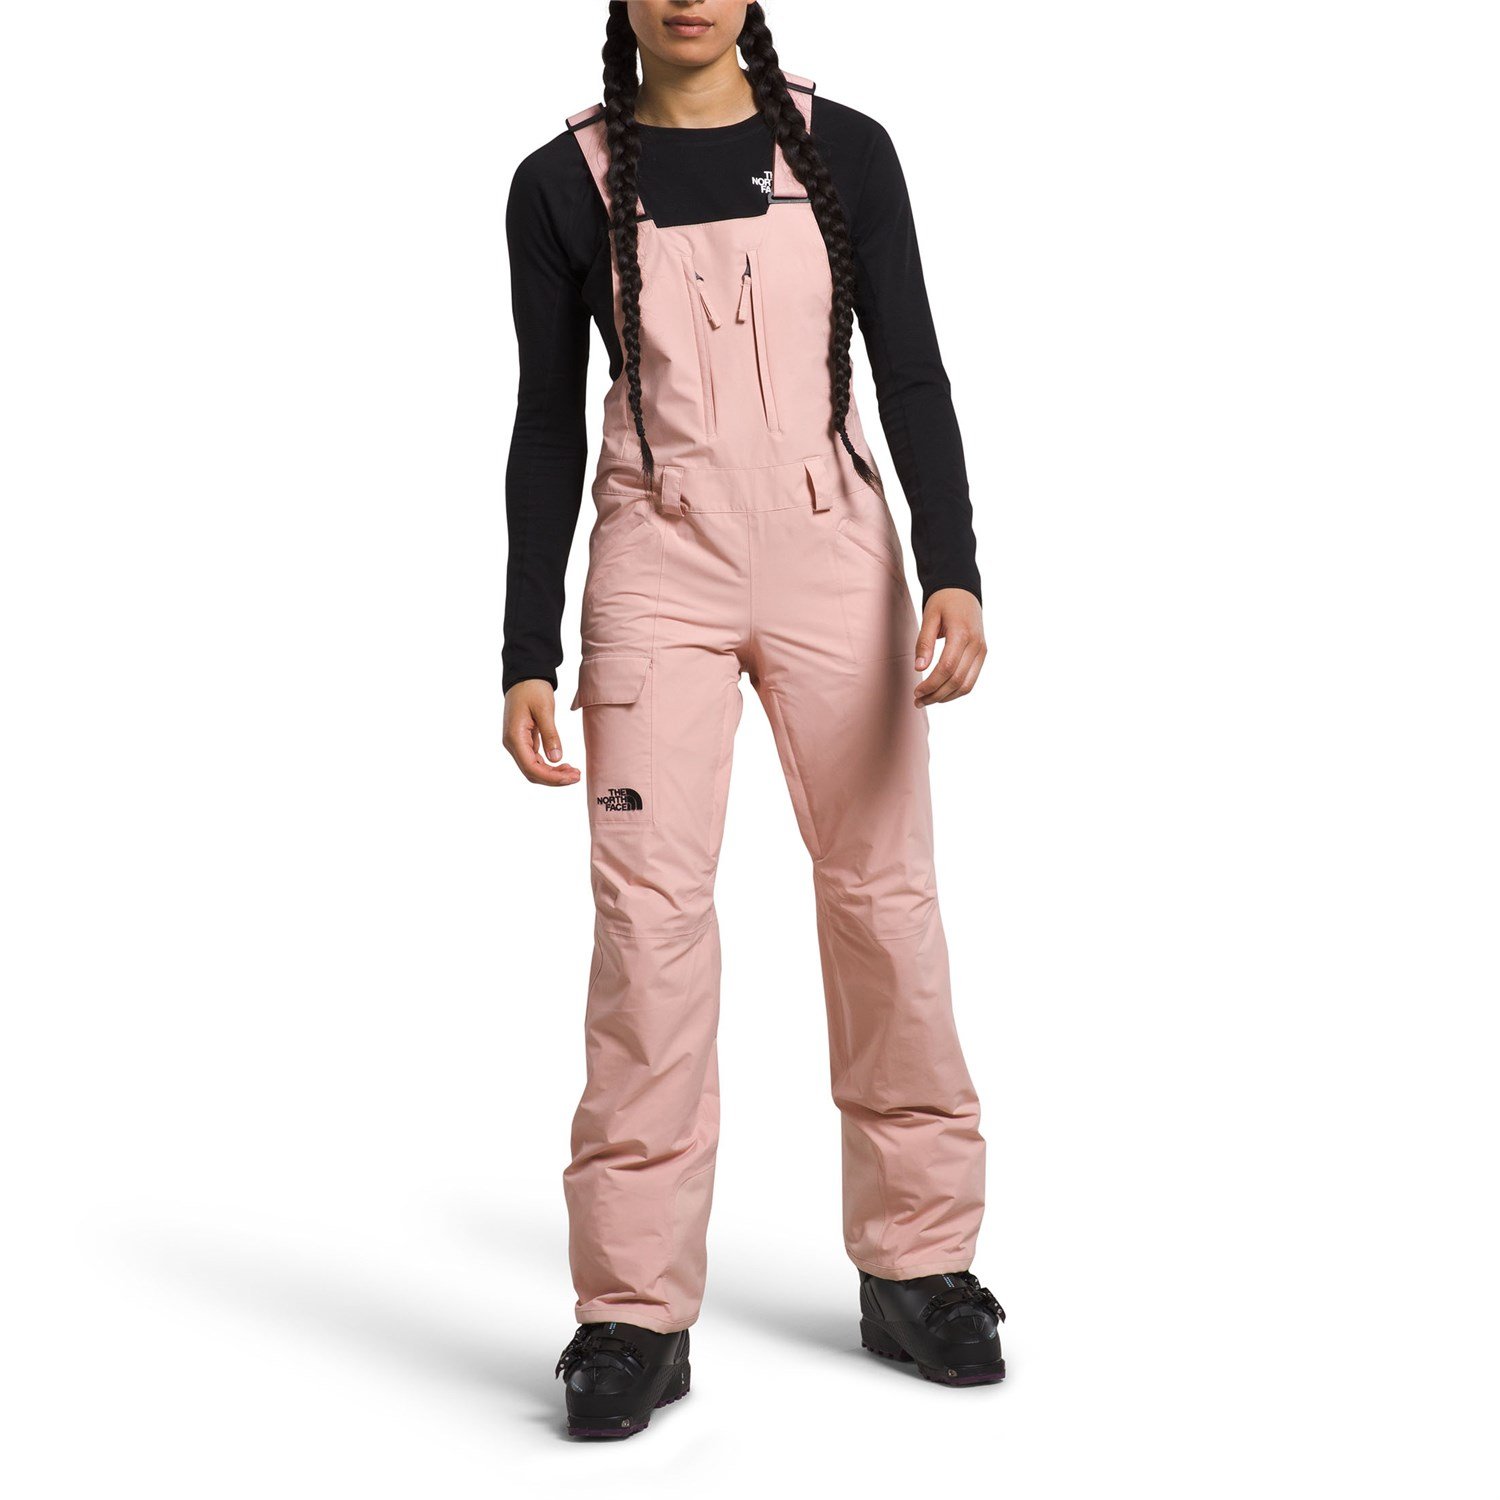 The North Face Women's Freedom Insulated Bib Snow Pants –